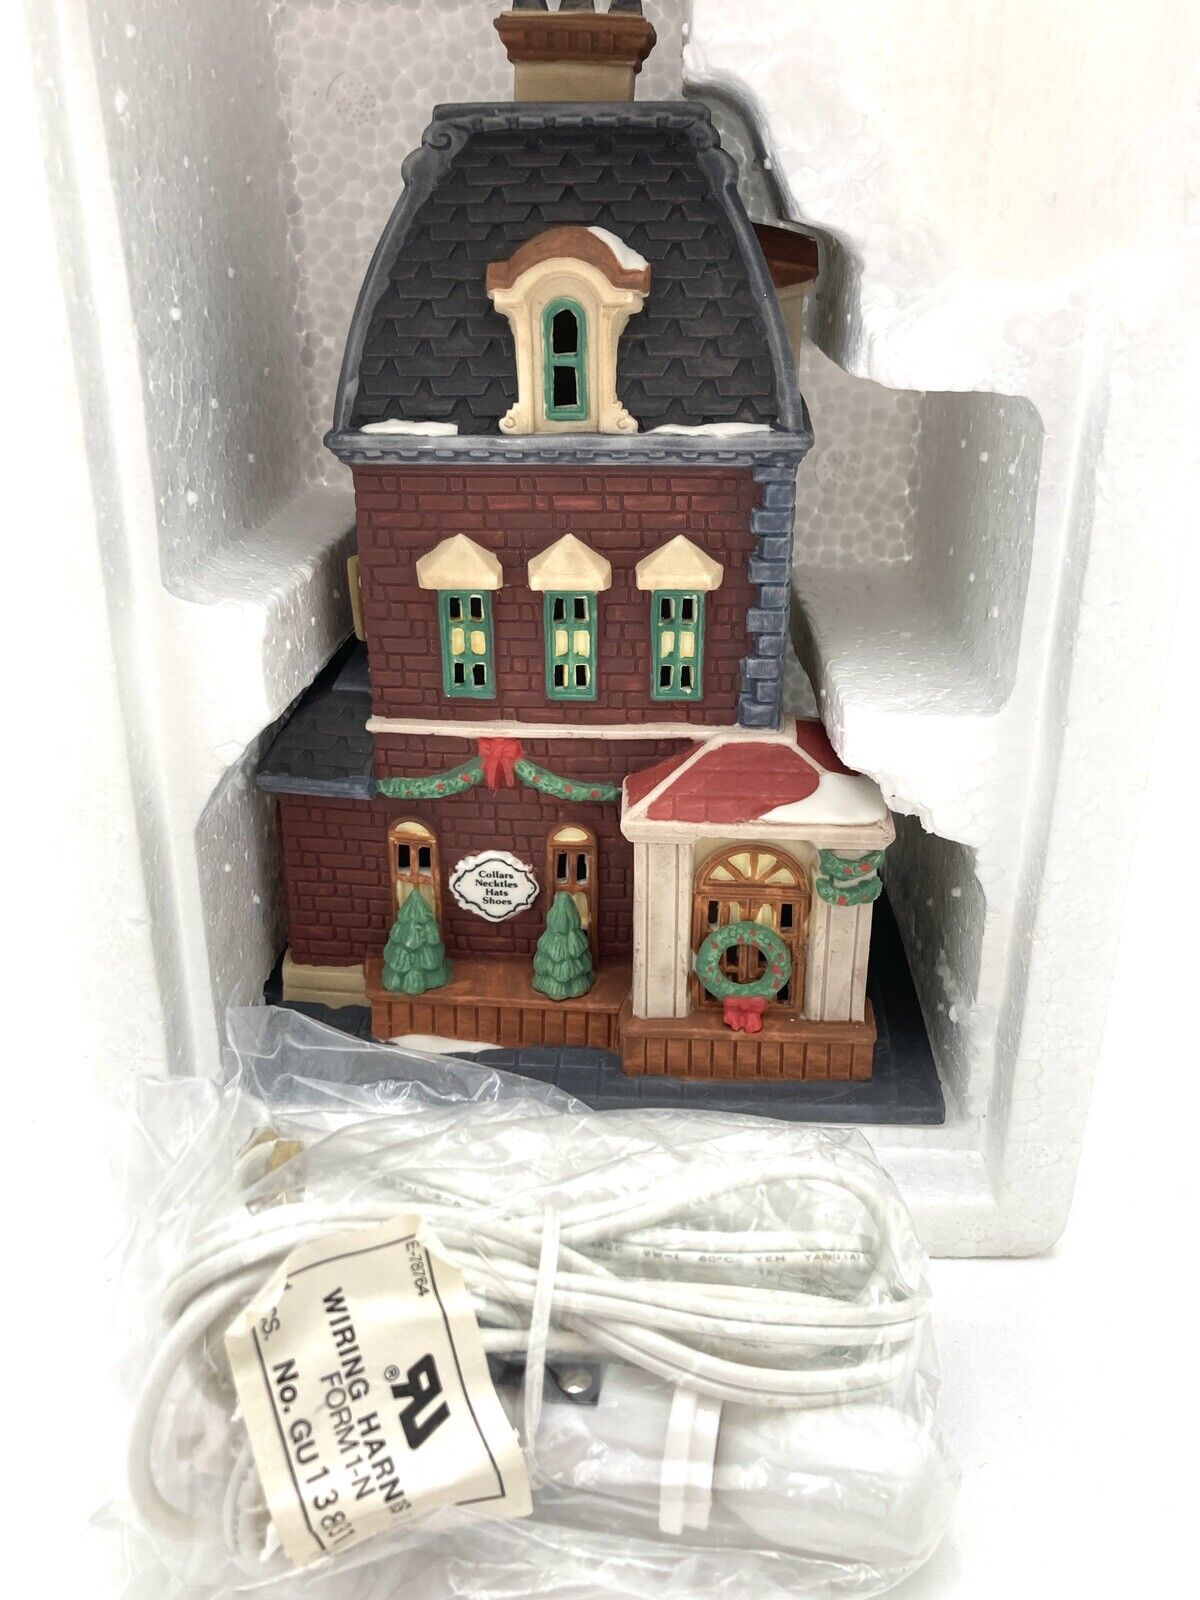 Department 56 Christmas In The City Series Haberdashery 5531-0 with box 1992 Vtg